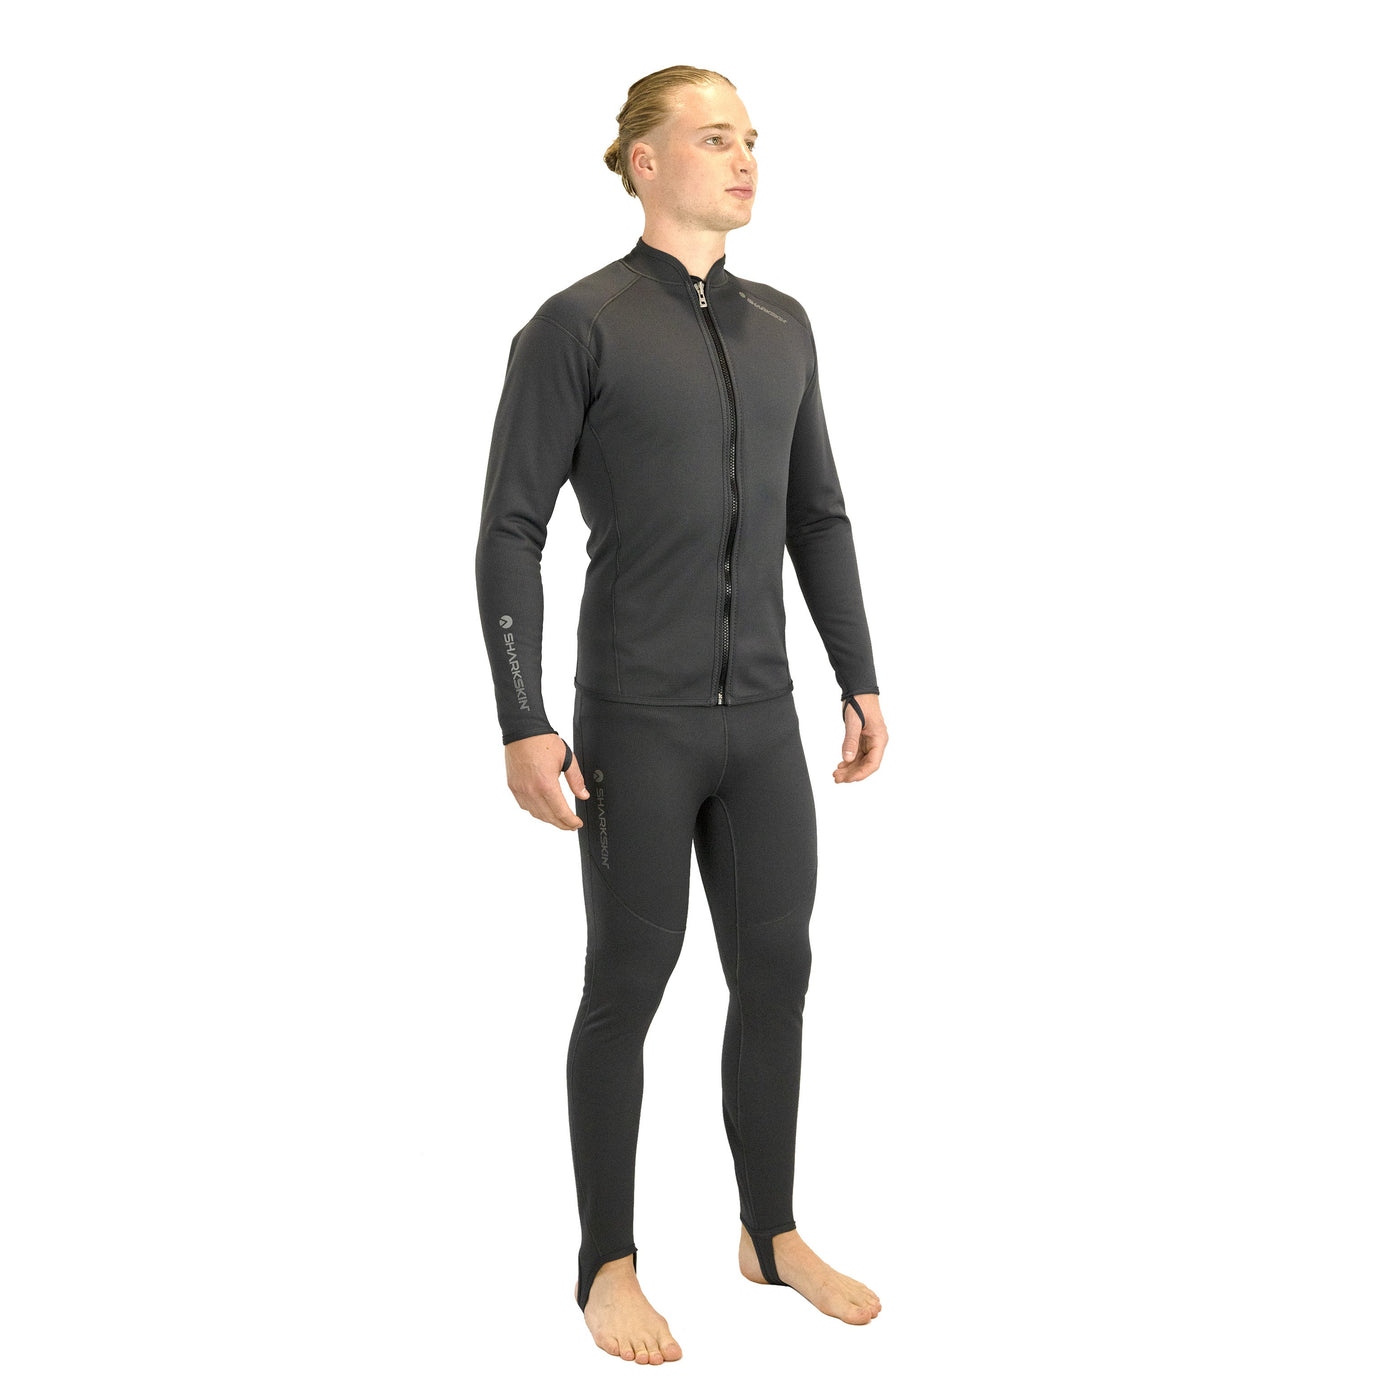 T2 Chillproof Top and Bottoms Package - Mens